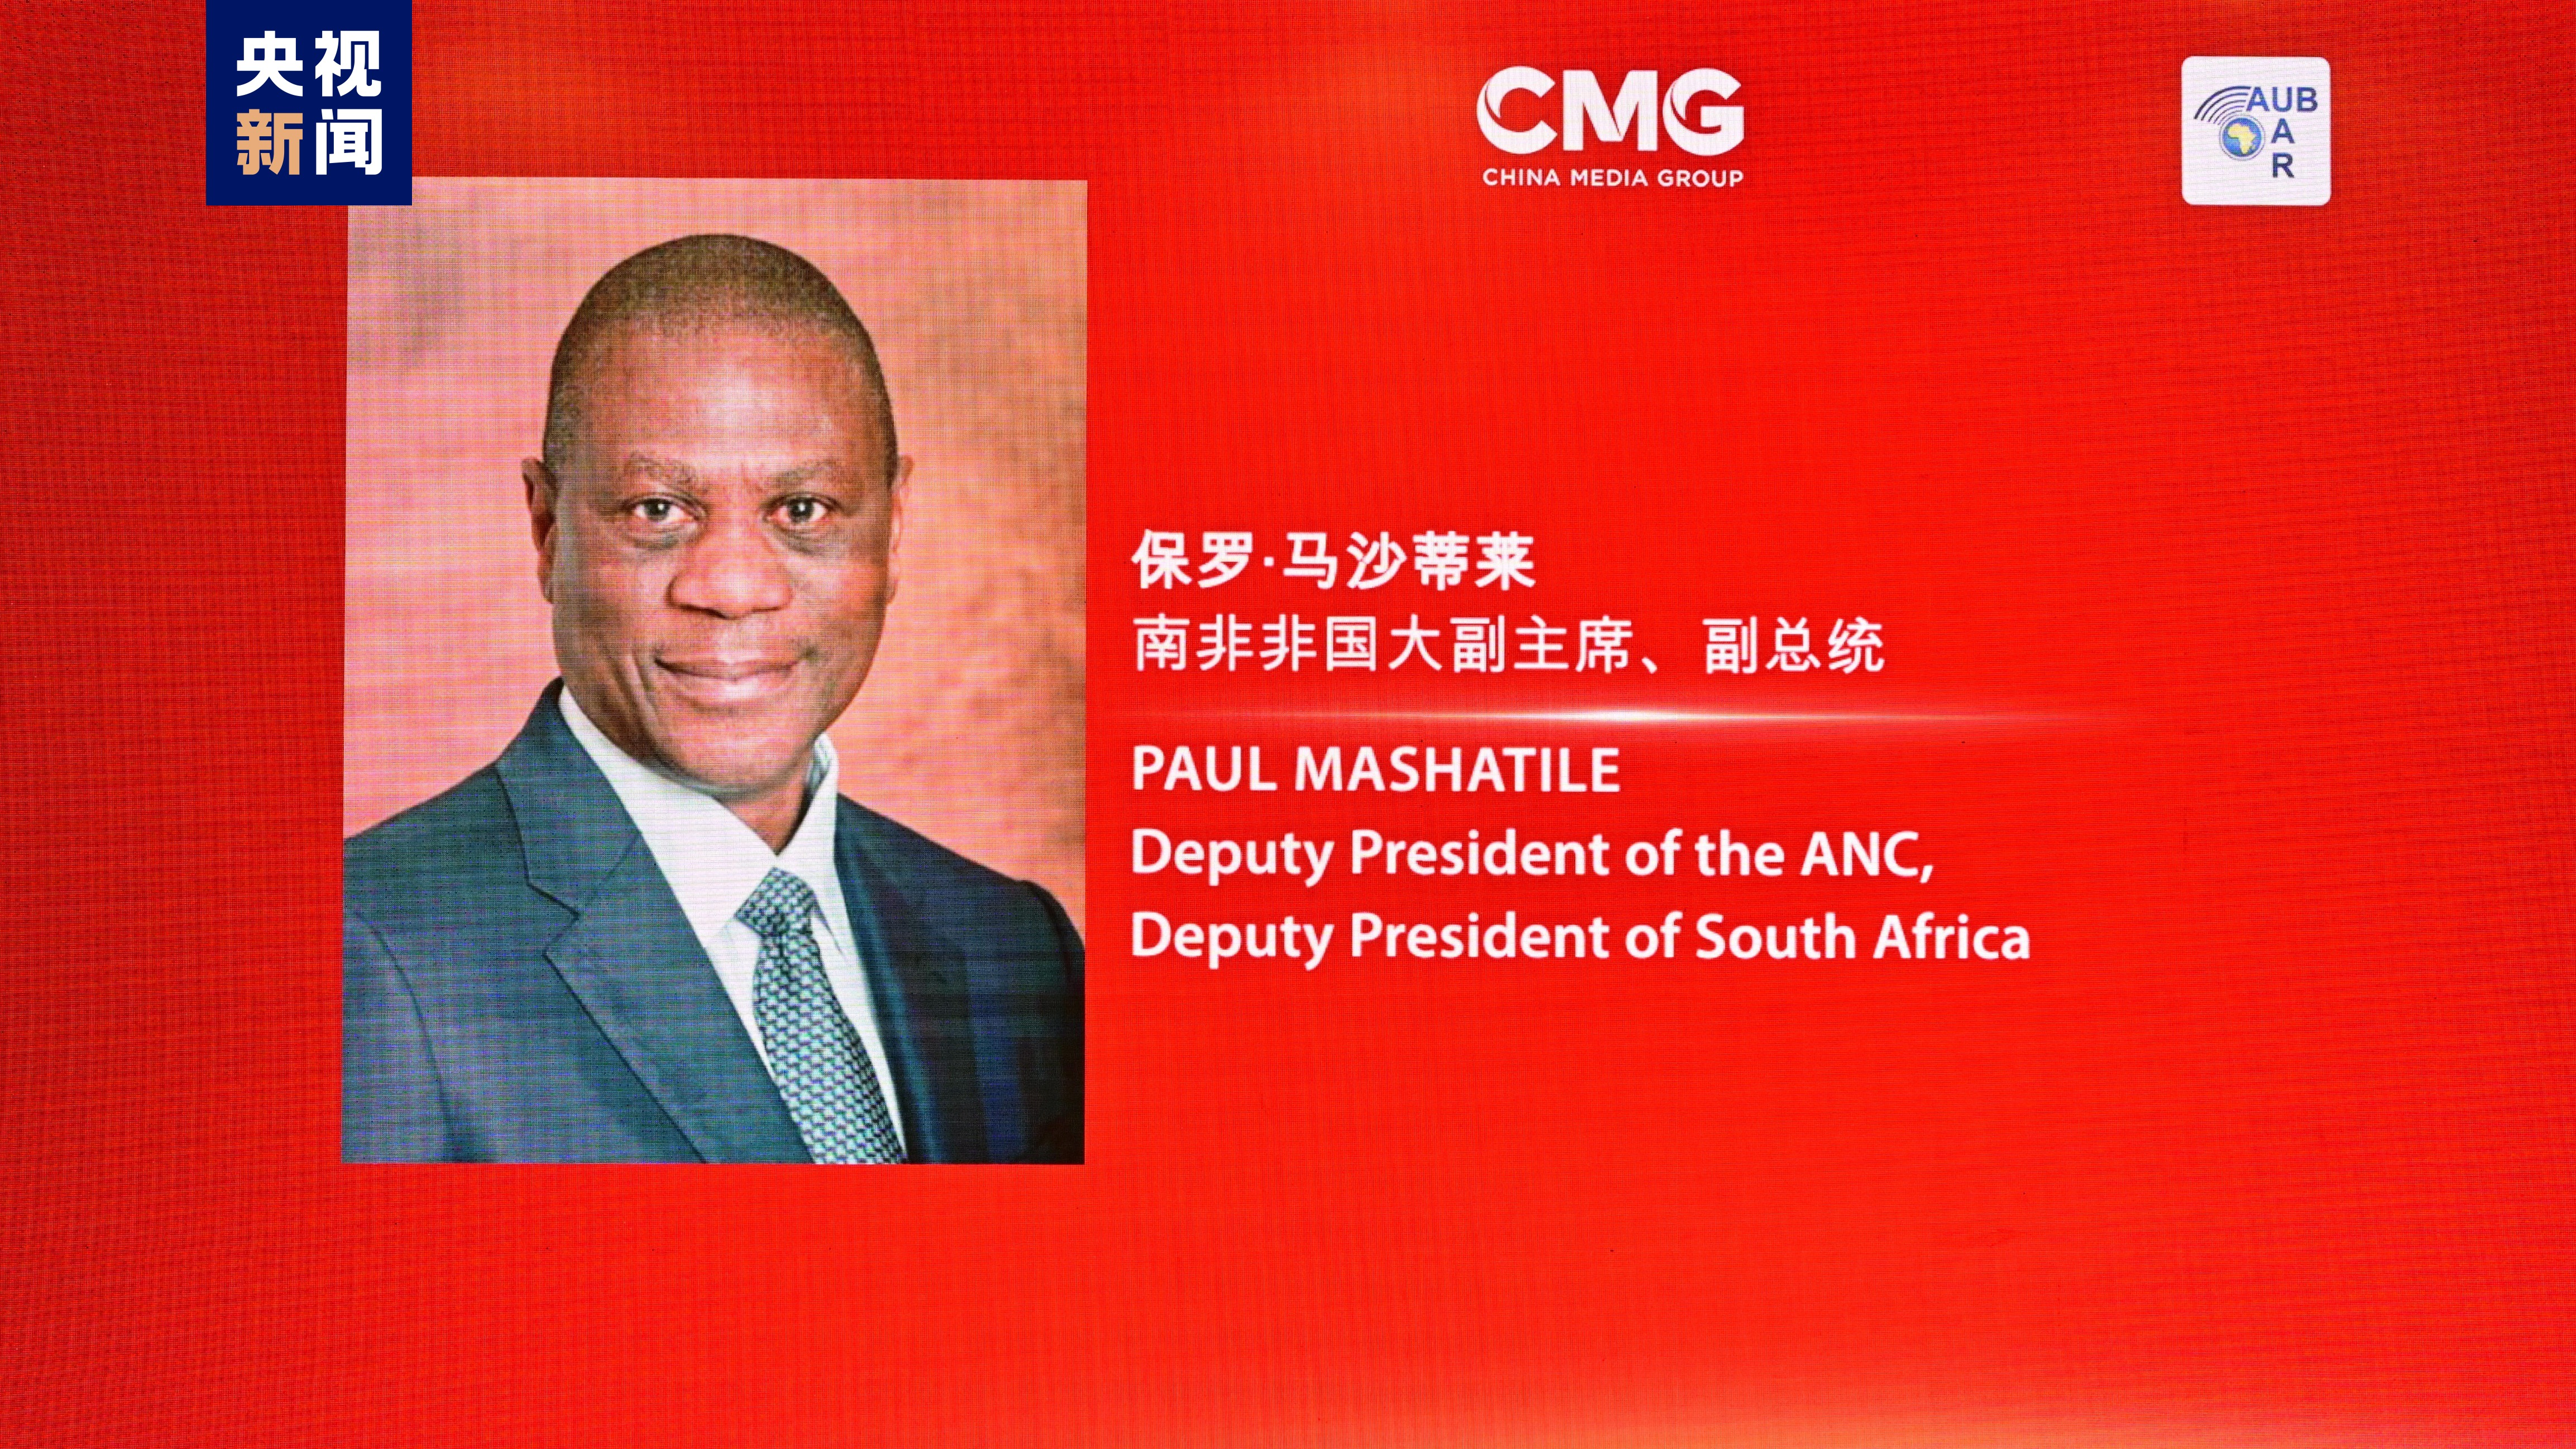 Paul Mashatile, deputy president of the African National Congress and deputy president of South Africa, delivers a written speech to the event. /CMG